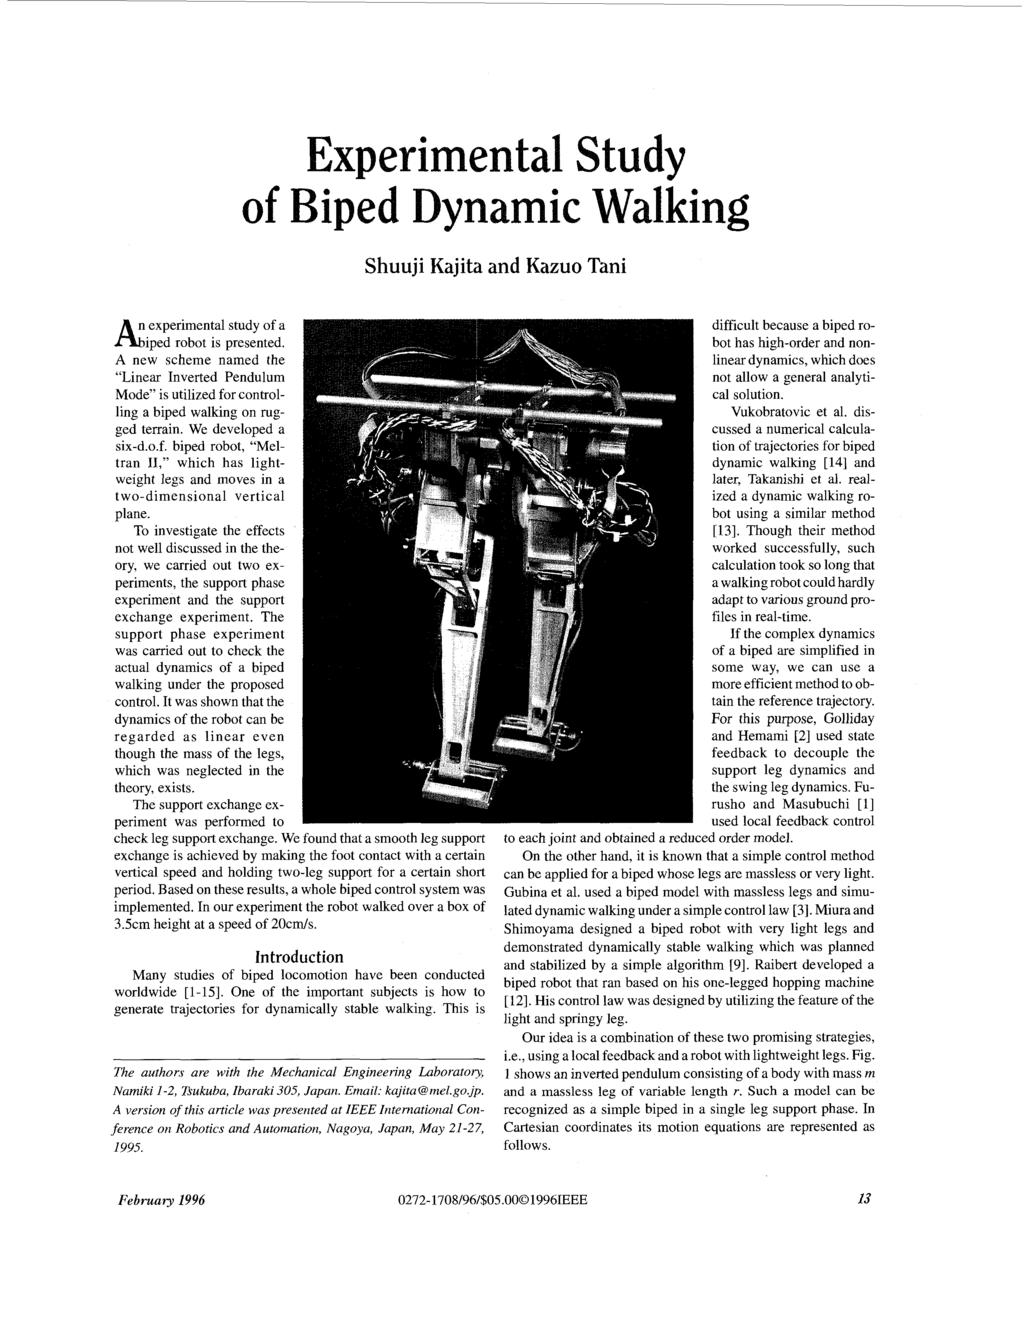 of Shuuji Kajita and Kazuo Tani in experimental study of a iped robot is presented. A new scheme named the Linear Inverted Pendulum Mode is utilized for controlling a biped walking on rugged terrain.